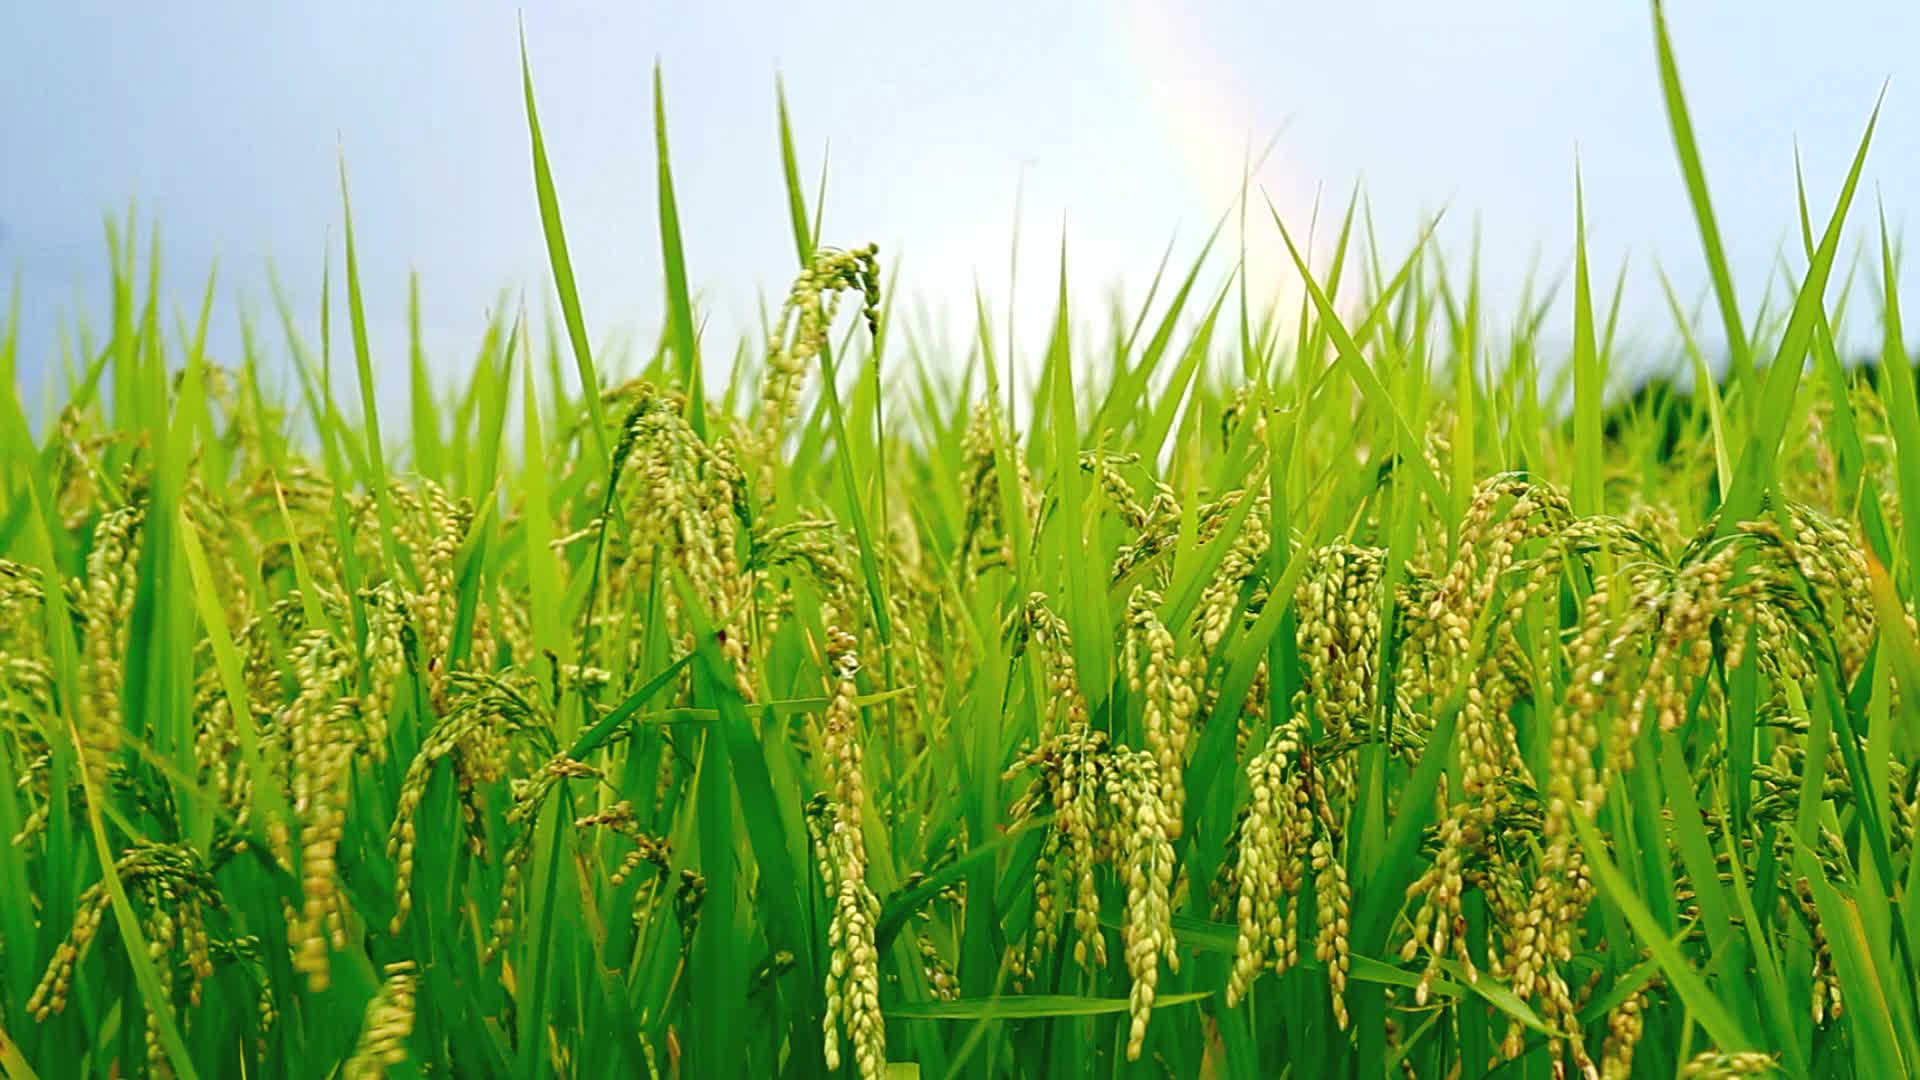 Video: Rice field with a rainbow in the background. ~ #11898394